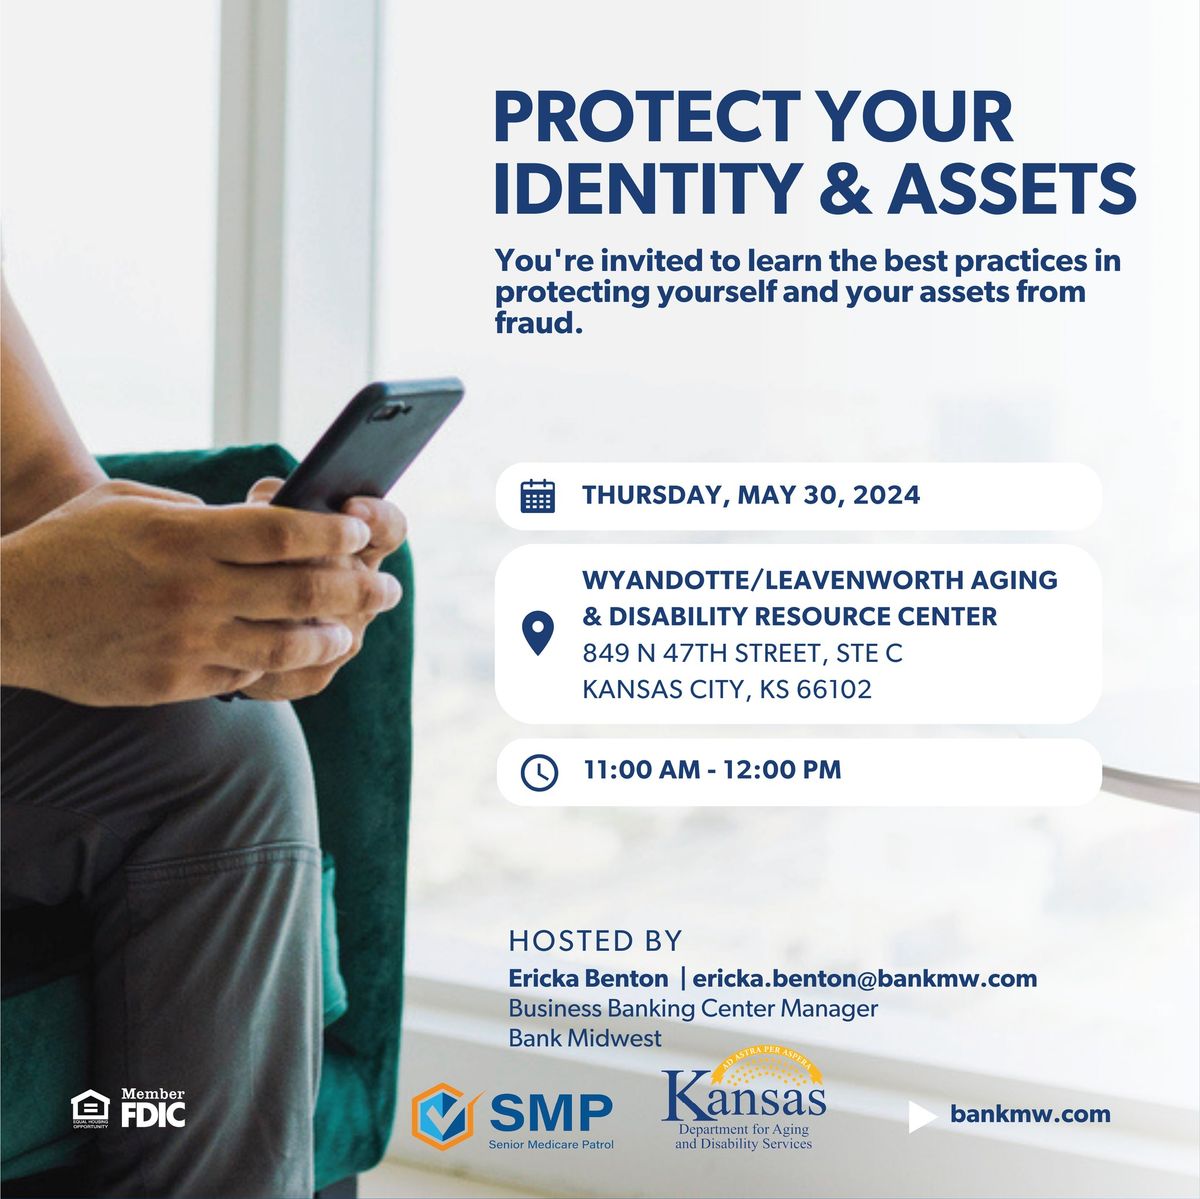 Protect your Identity & Assets 